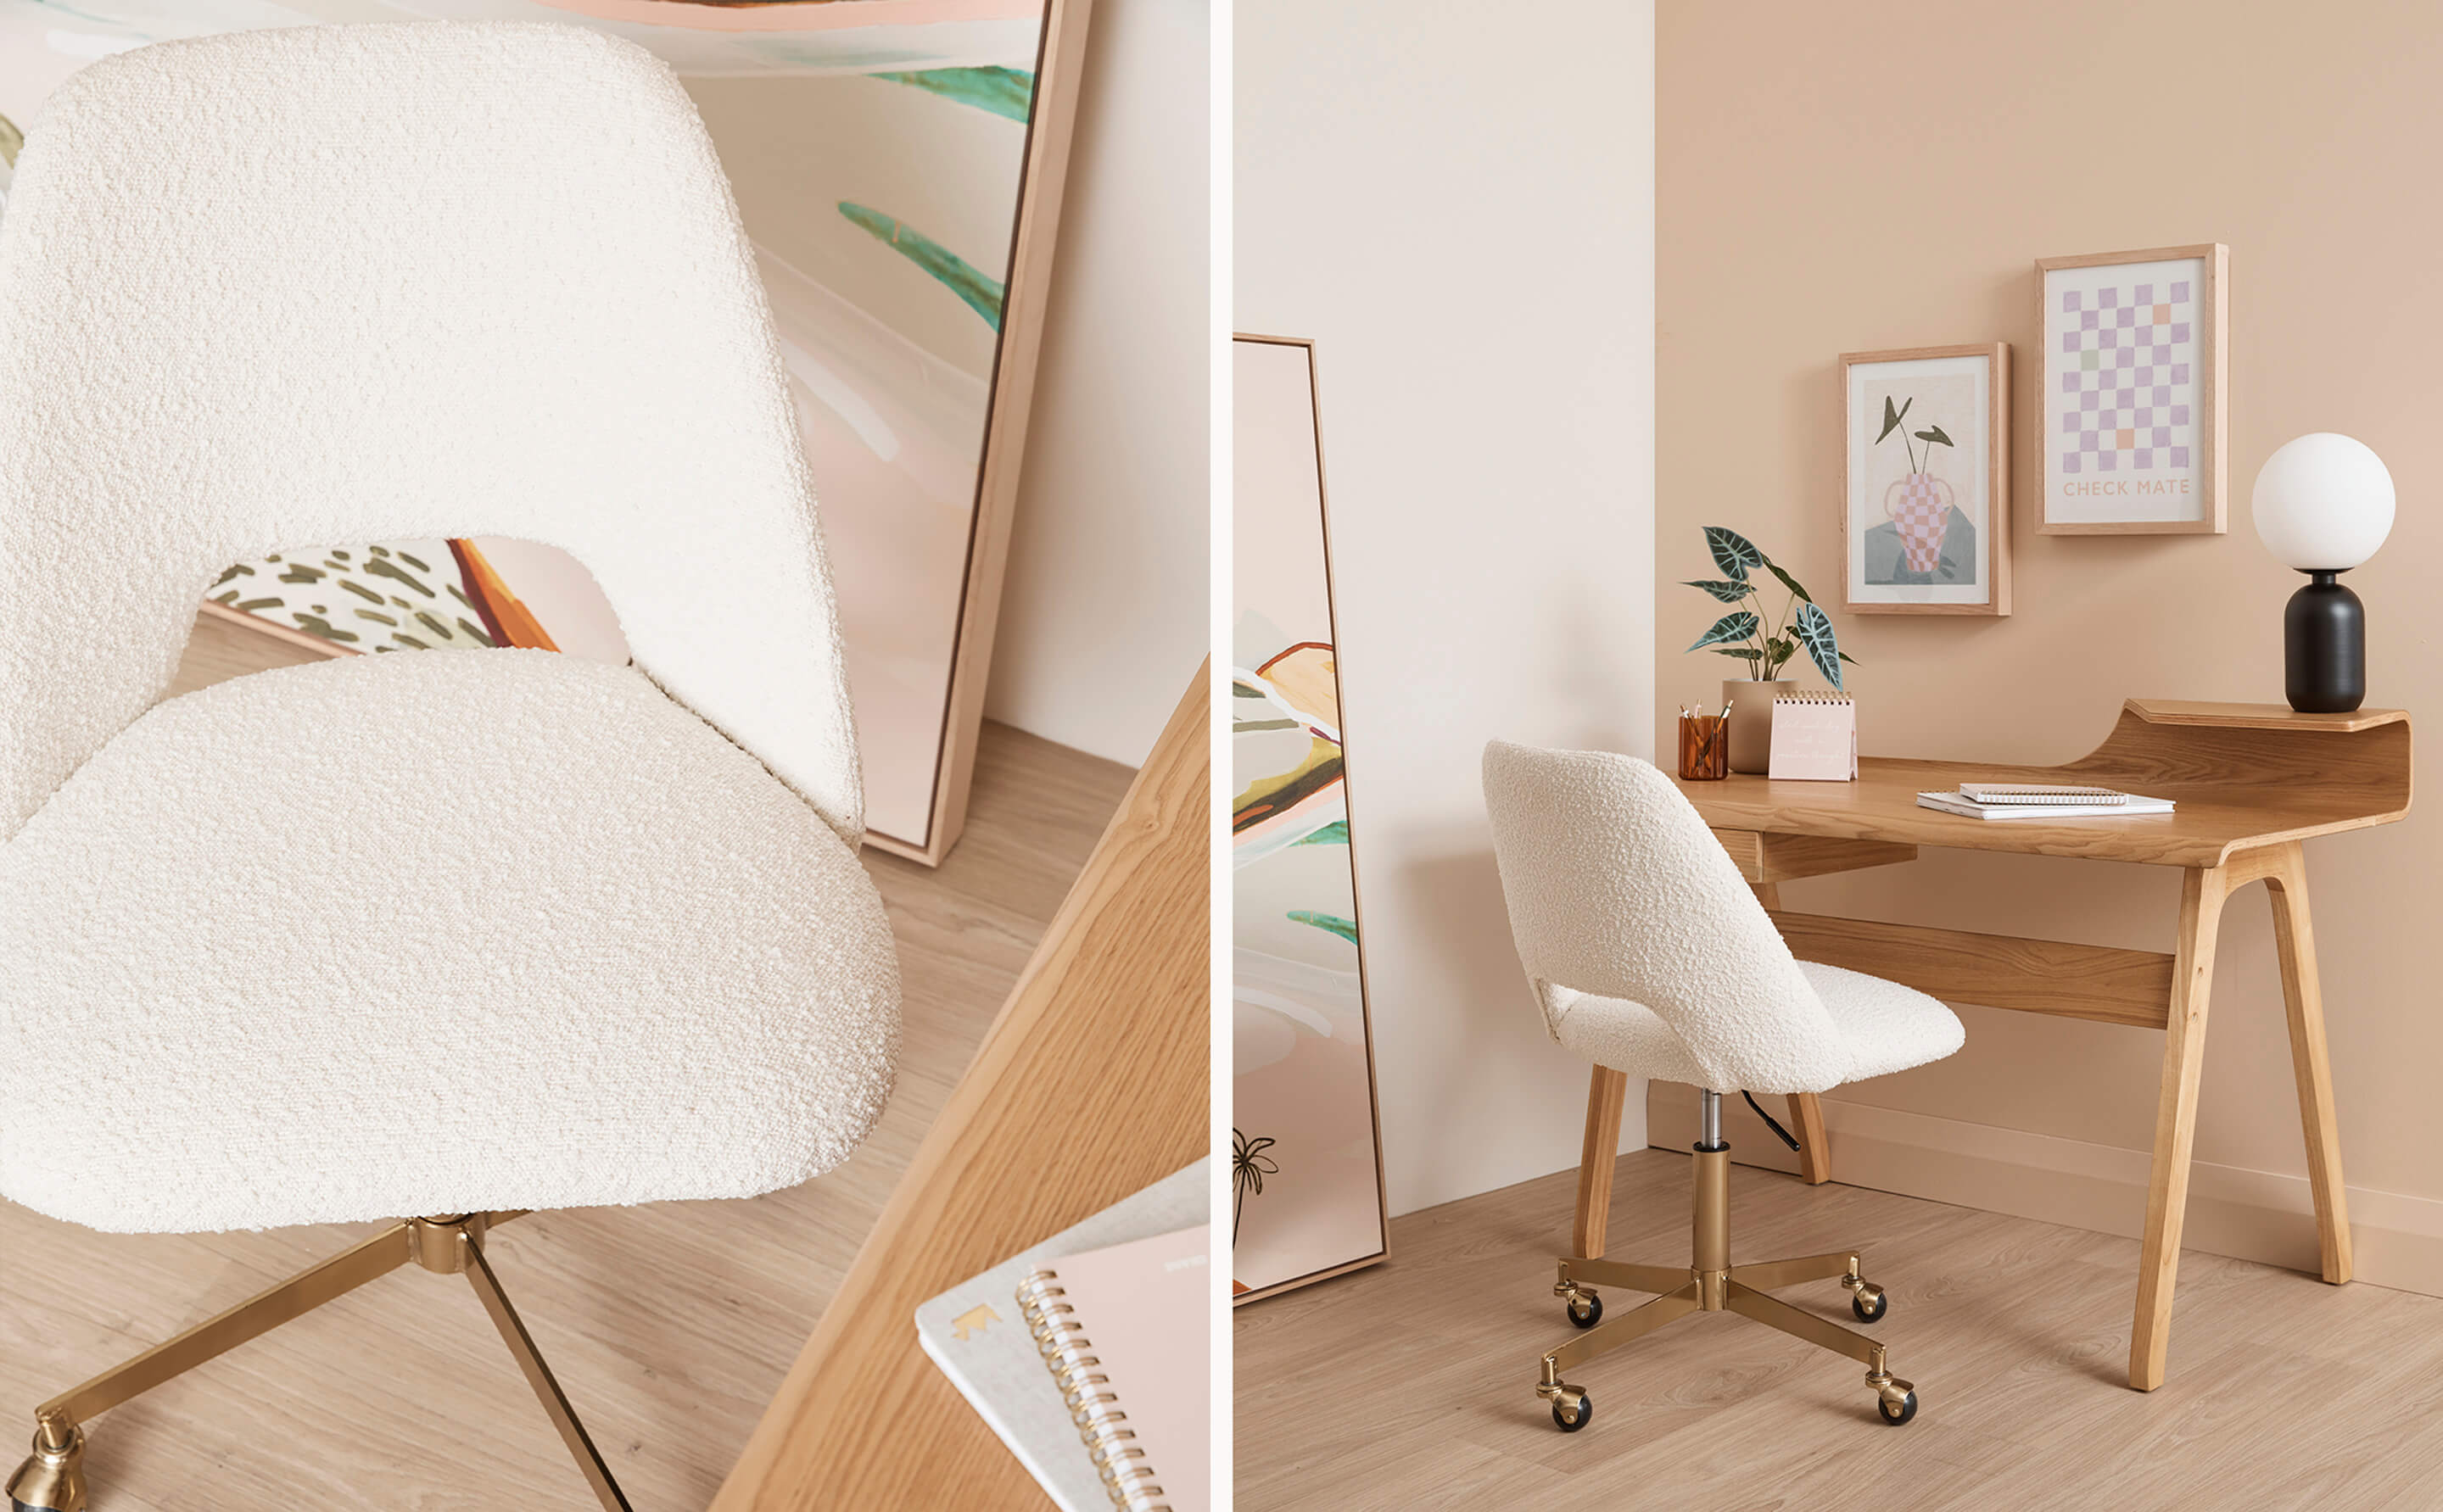 Introducing our Abode Spring Summer 22 collection, full of neutral yet fun living, dining, home office, and bedroom spaces. Shop the Work From Home collection online or in-store now!